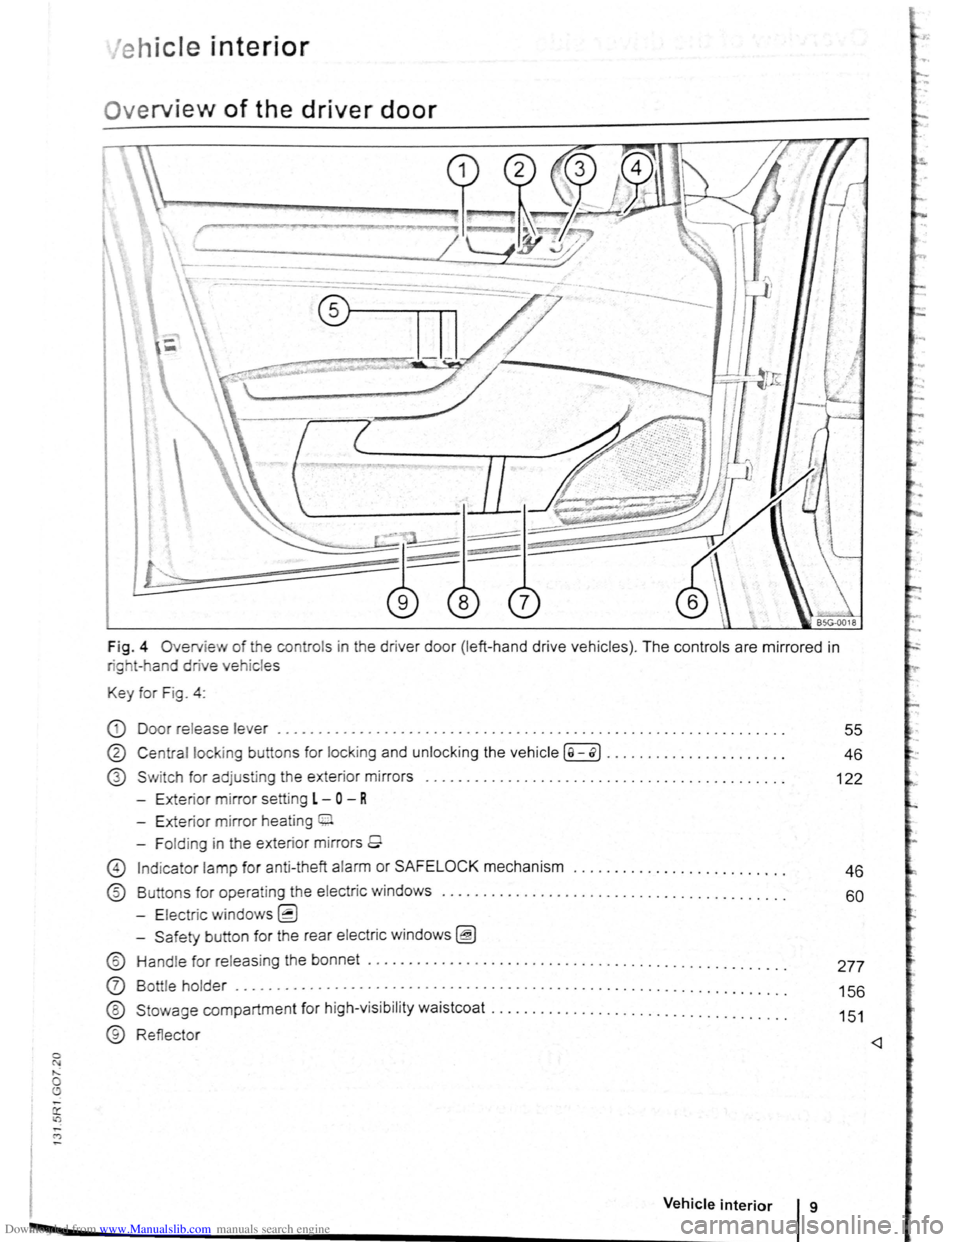 VOLKSWAGEN BEETLE 2010  Owners Manual Downloaded from www.Manualslib.com manuals search engine 0 N ,..; 0 
e h ic le interior 
Ov erview of the driver door 
Fig . 4 Overv ie w of the  contro ls  in  the drive r doo r (left -ha nd  dr ive